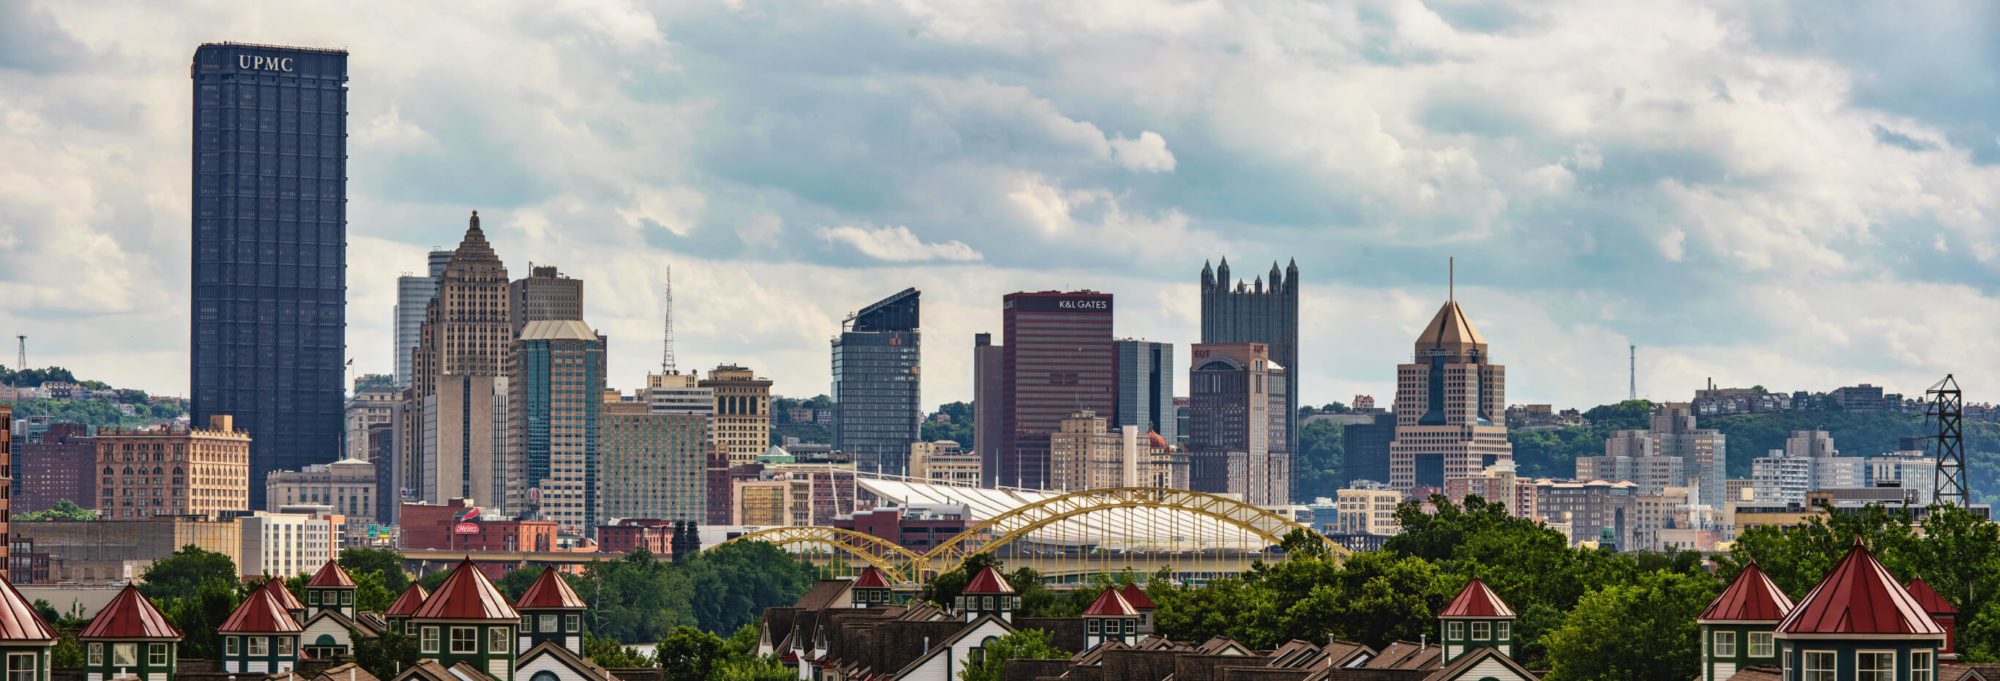 A view of downtown Pittsburgh